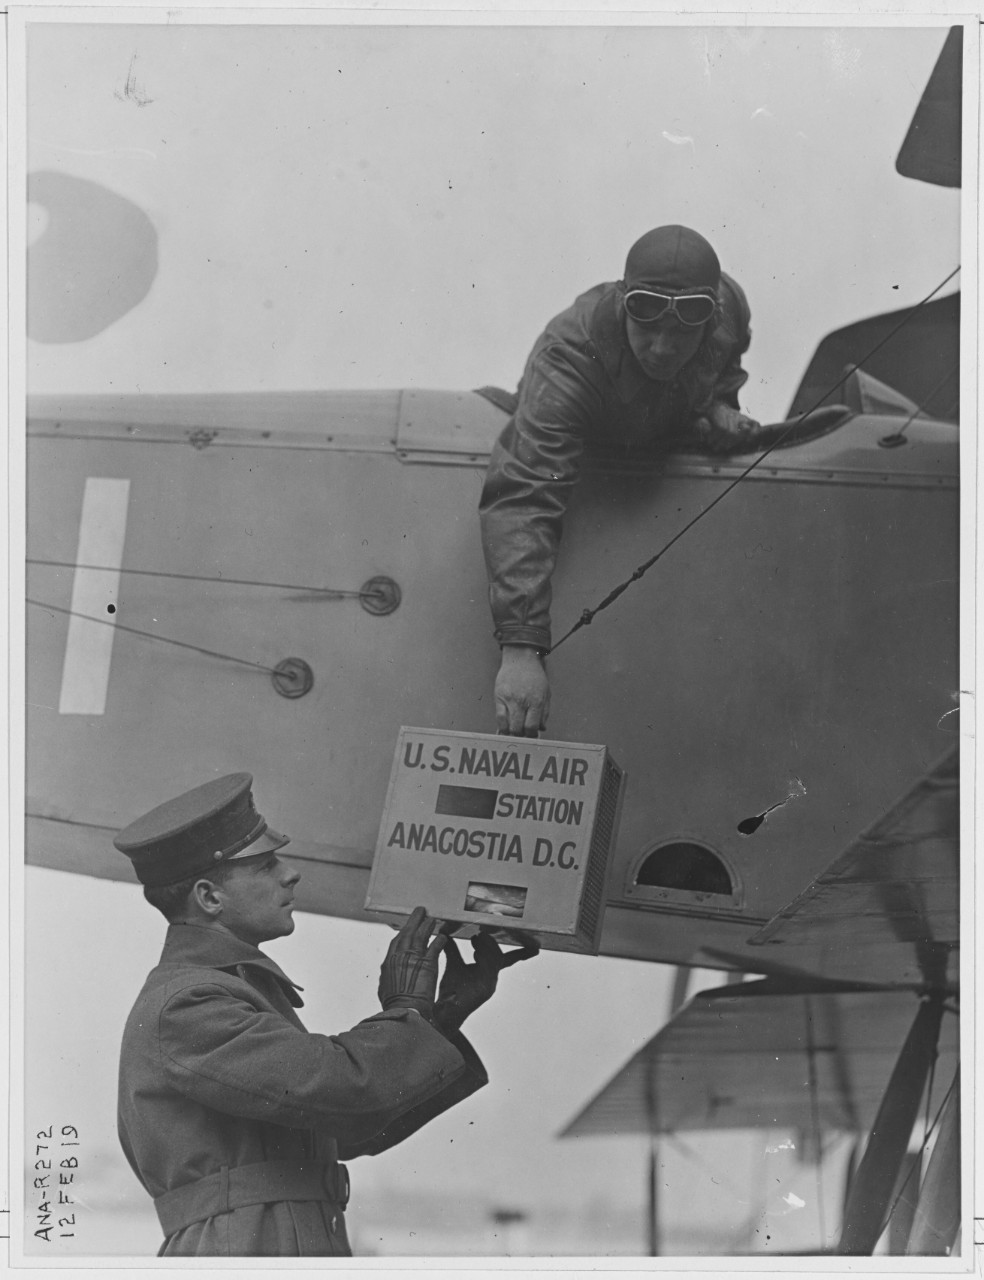 Four-bird size pigeon box containing pigeons is handed to the pilot in airplane. February 12, 1919